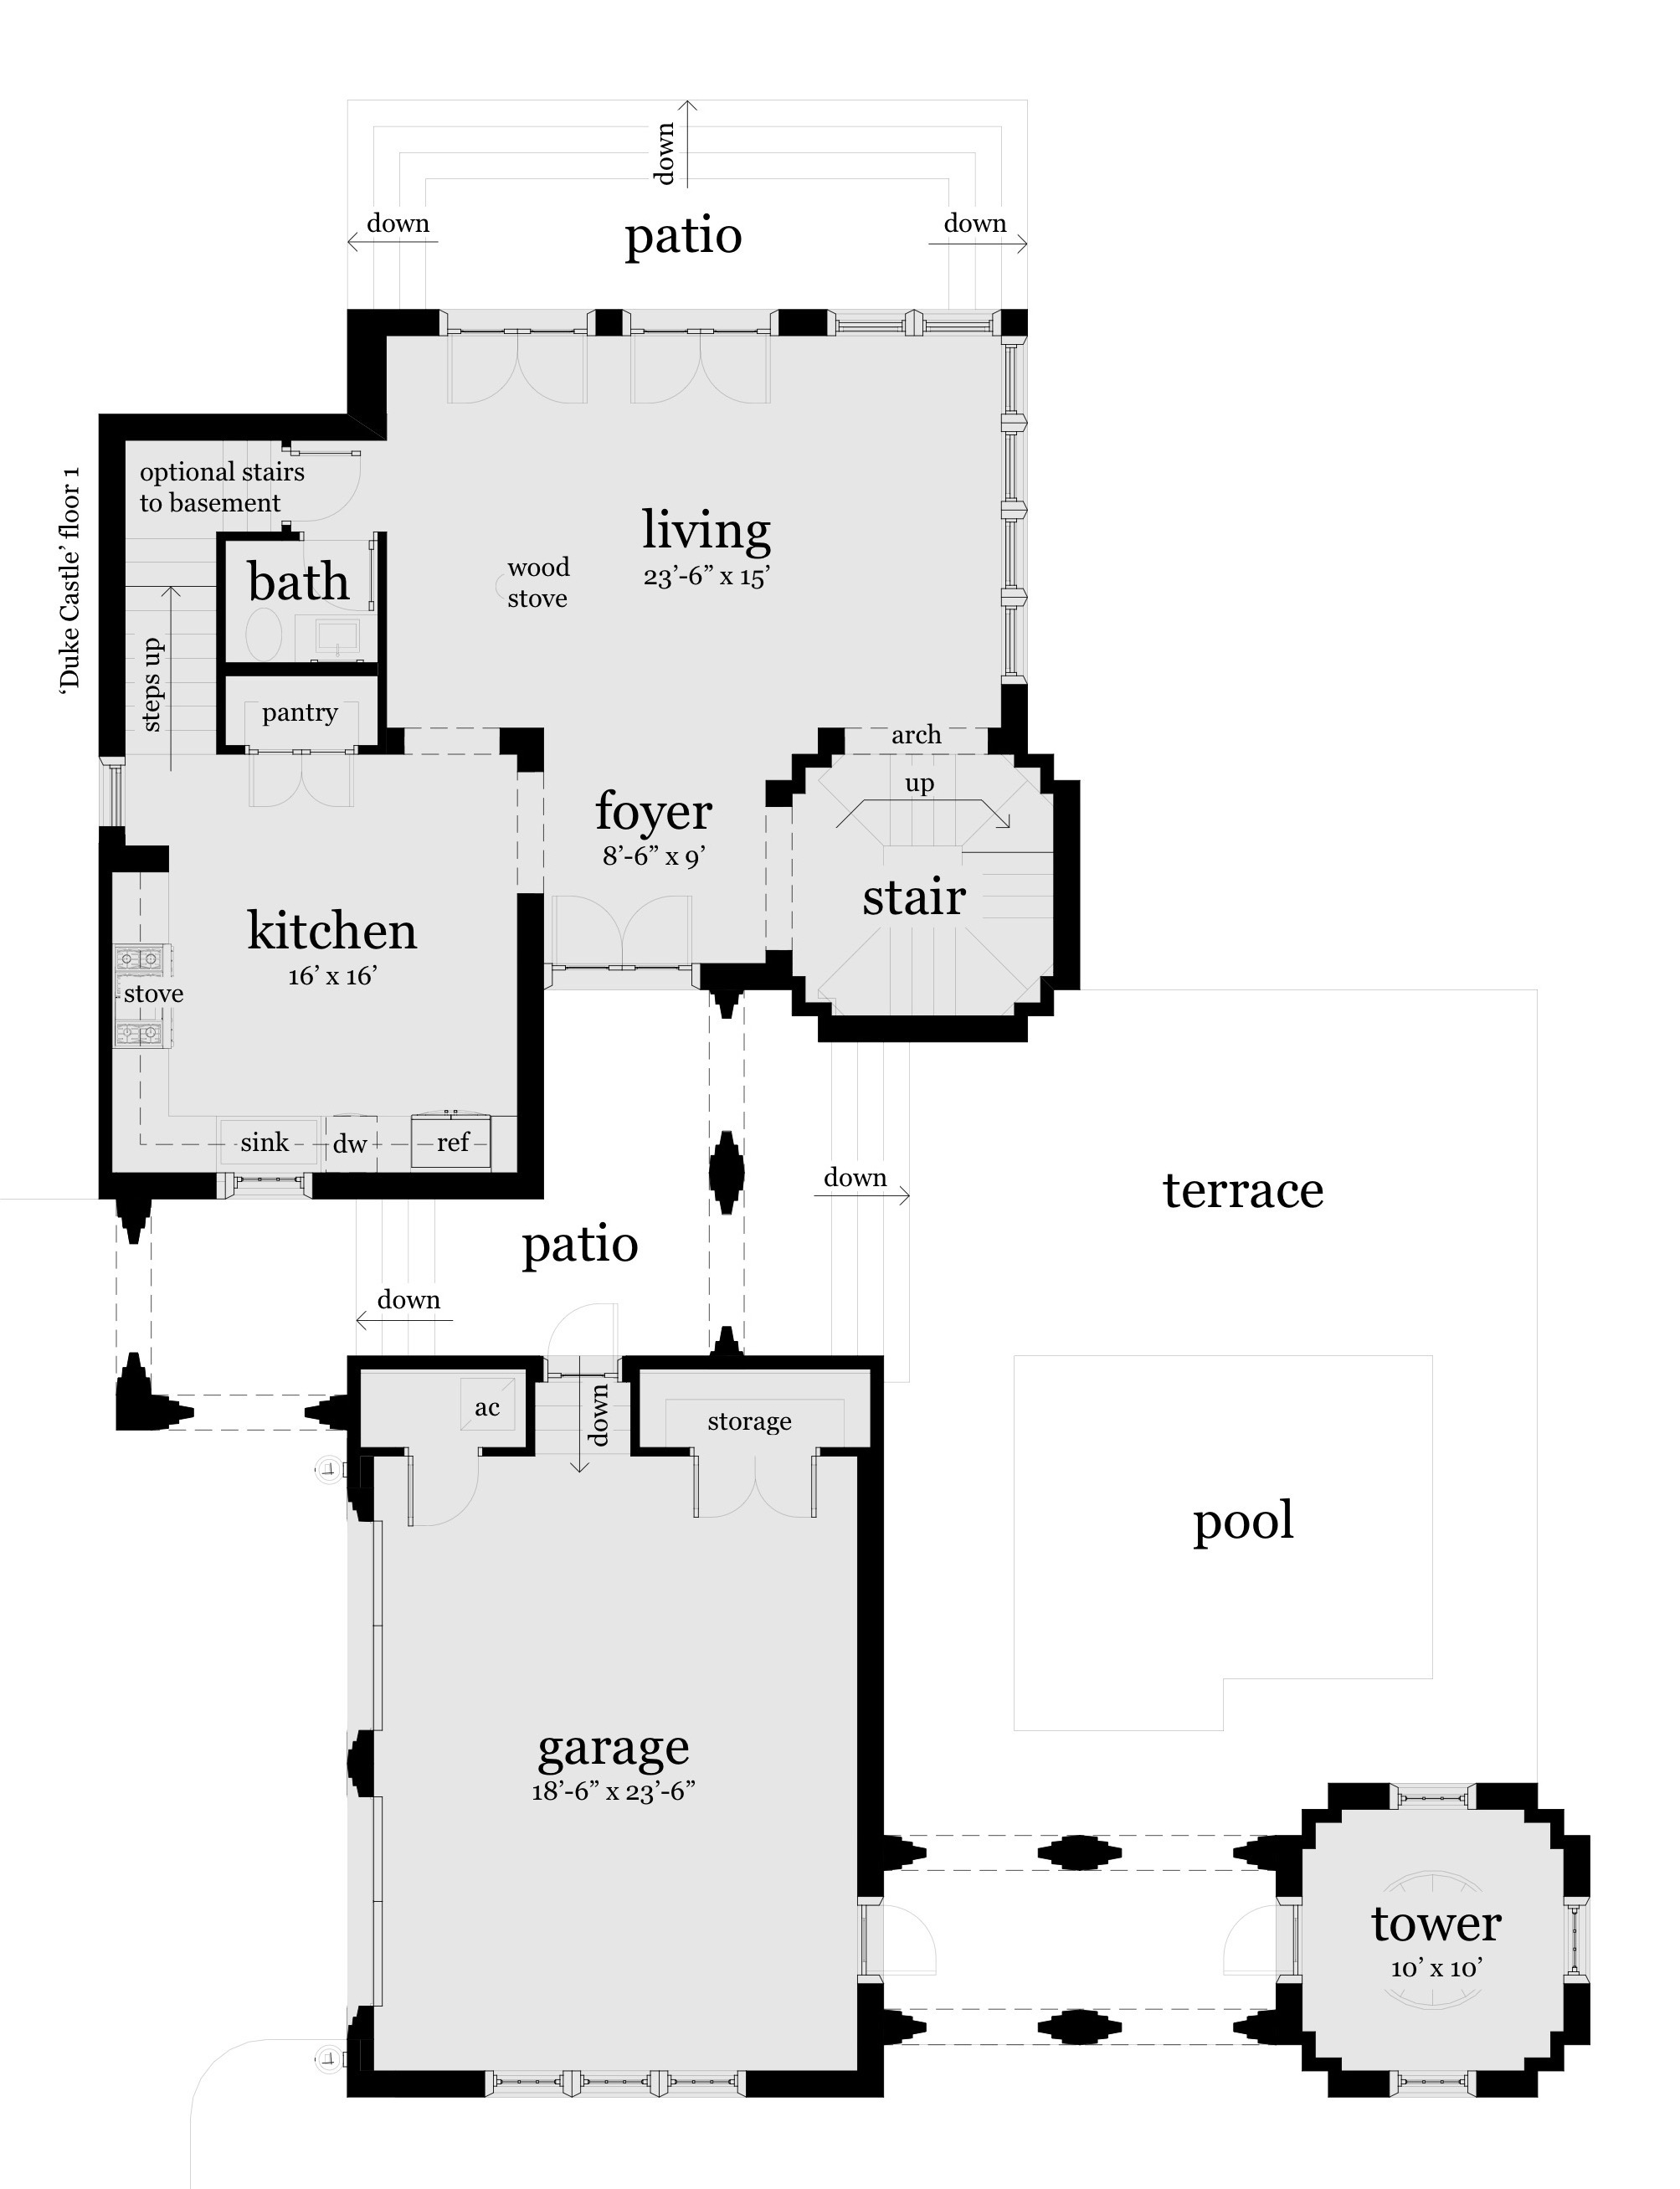 Castle Home with 2 Stair Towers Tyree House Plans 